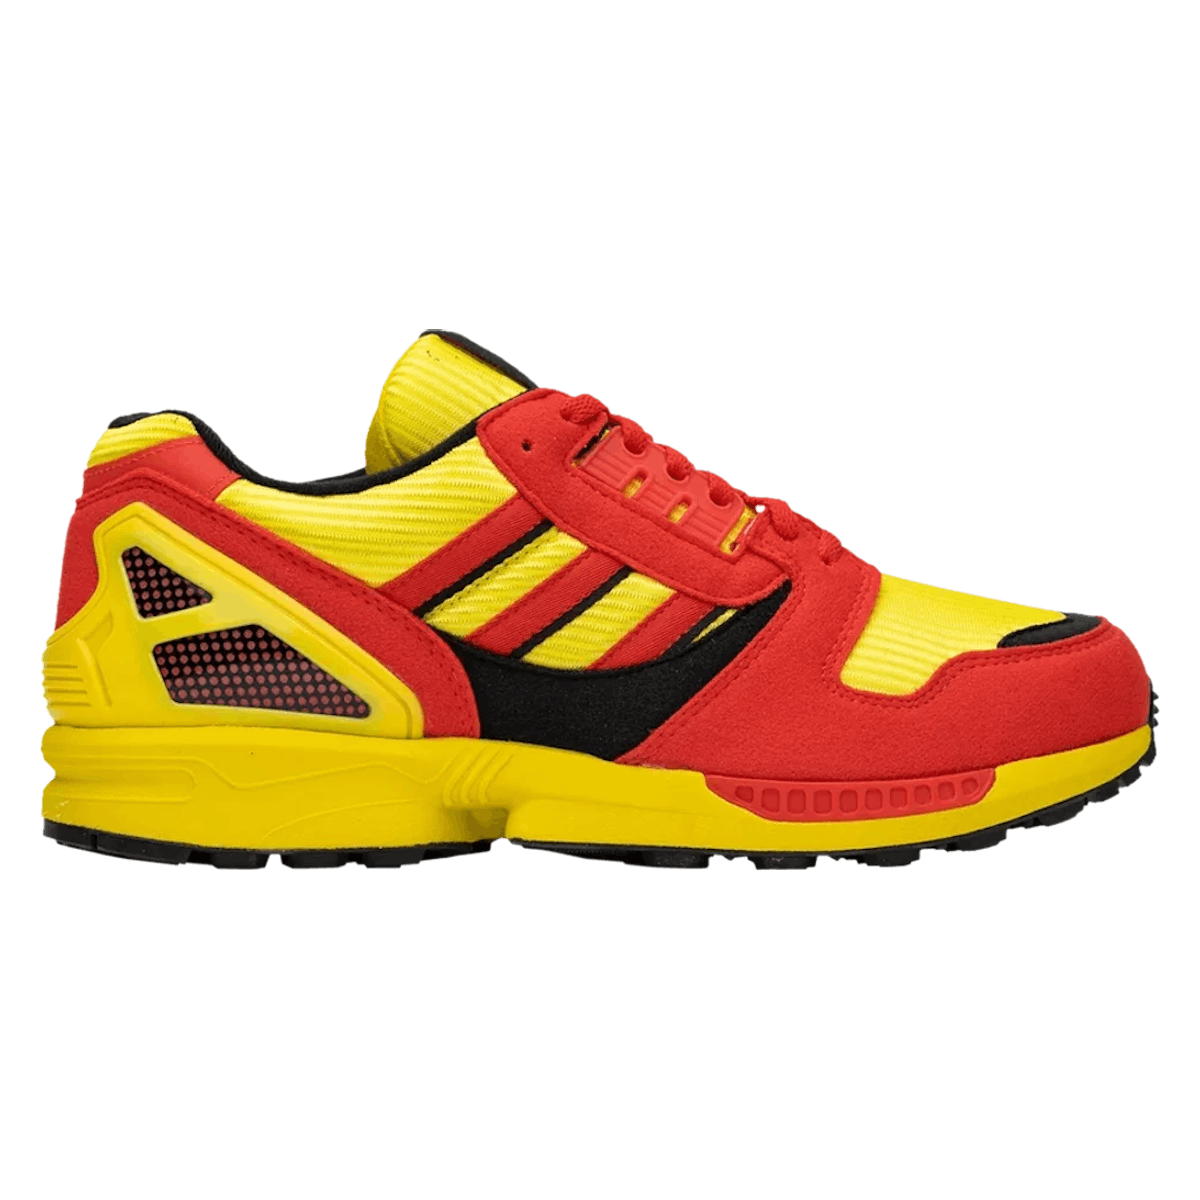 Adidas ZX 8000 "Bright Yellow Red"